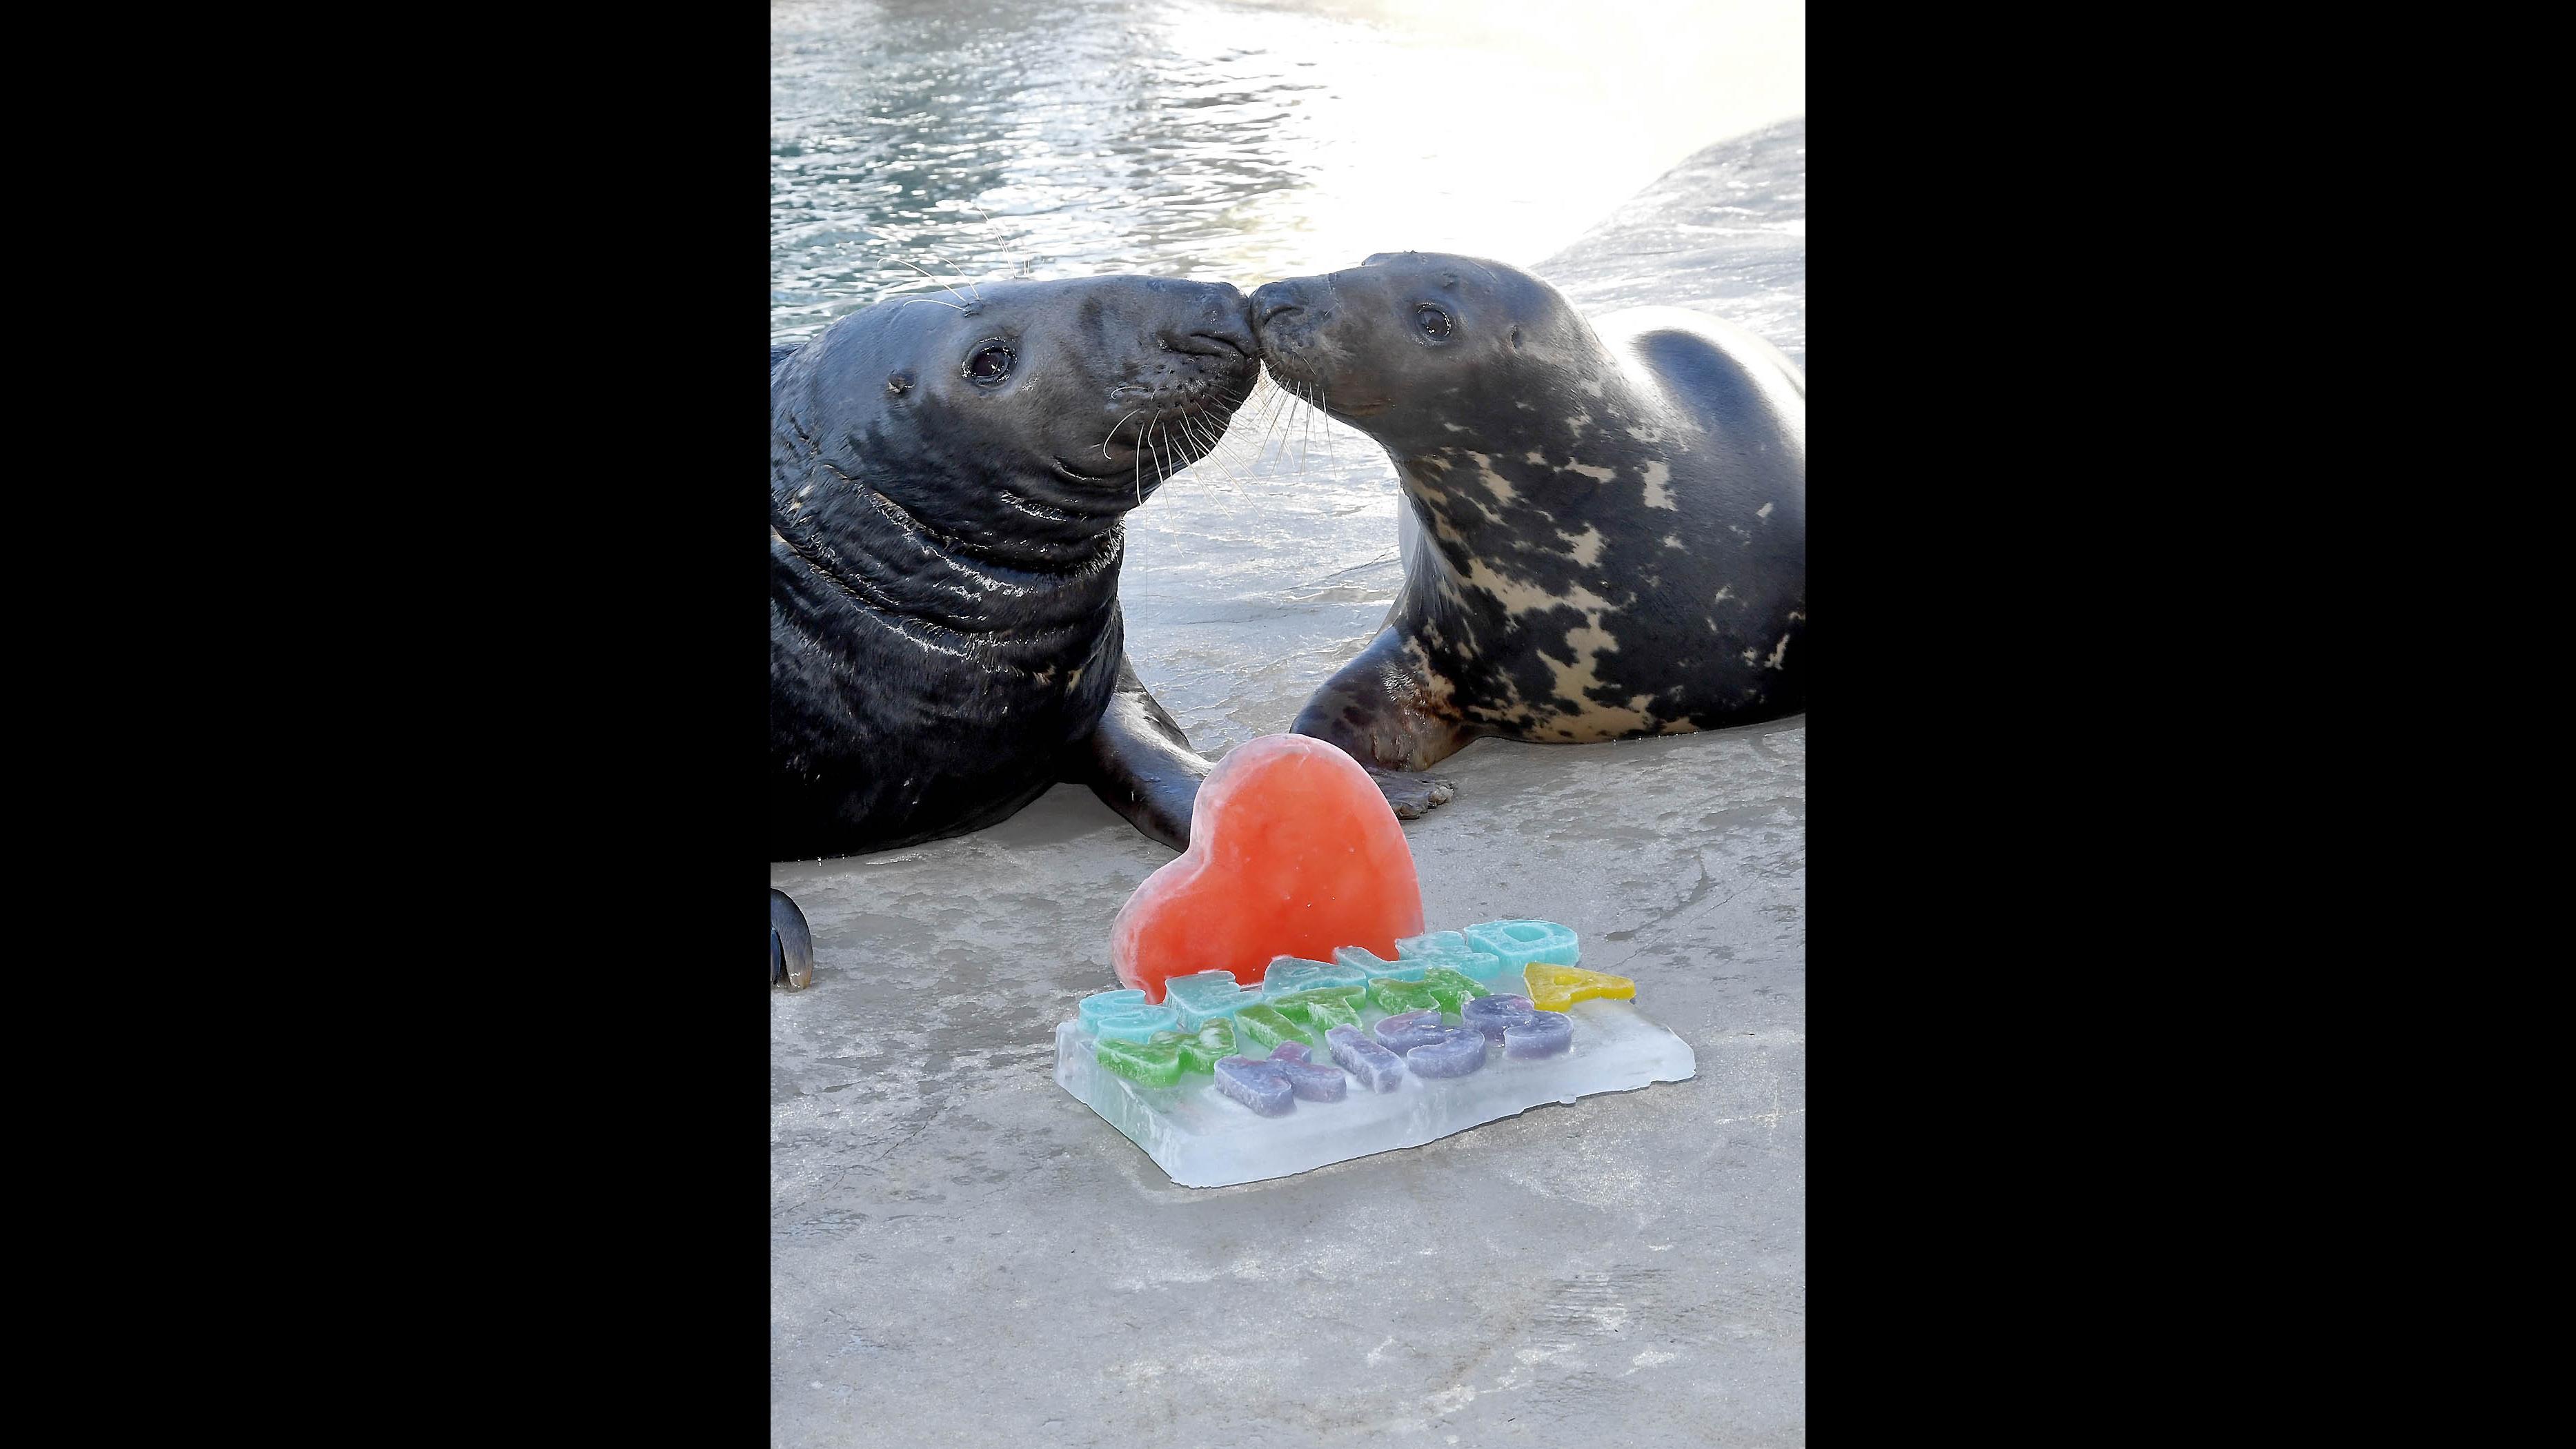 Boone, left, and Lily, 13-year-old gray seals at Brookfield Zoo, with a Valentine’s Day treat made of gelatin. (Jim Schulz / Chicago Zoological Society)